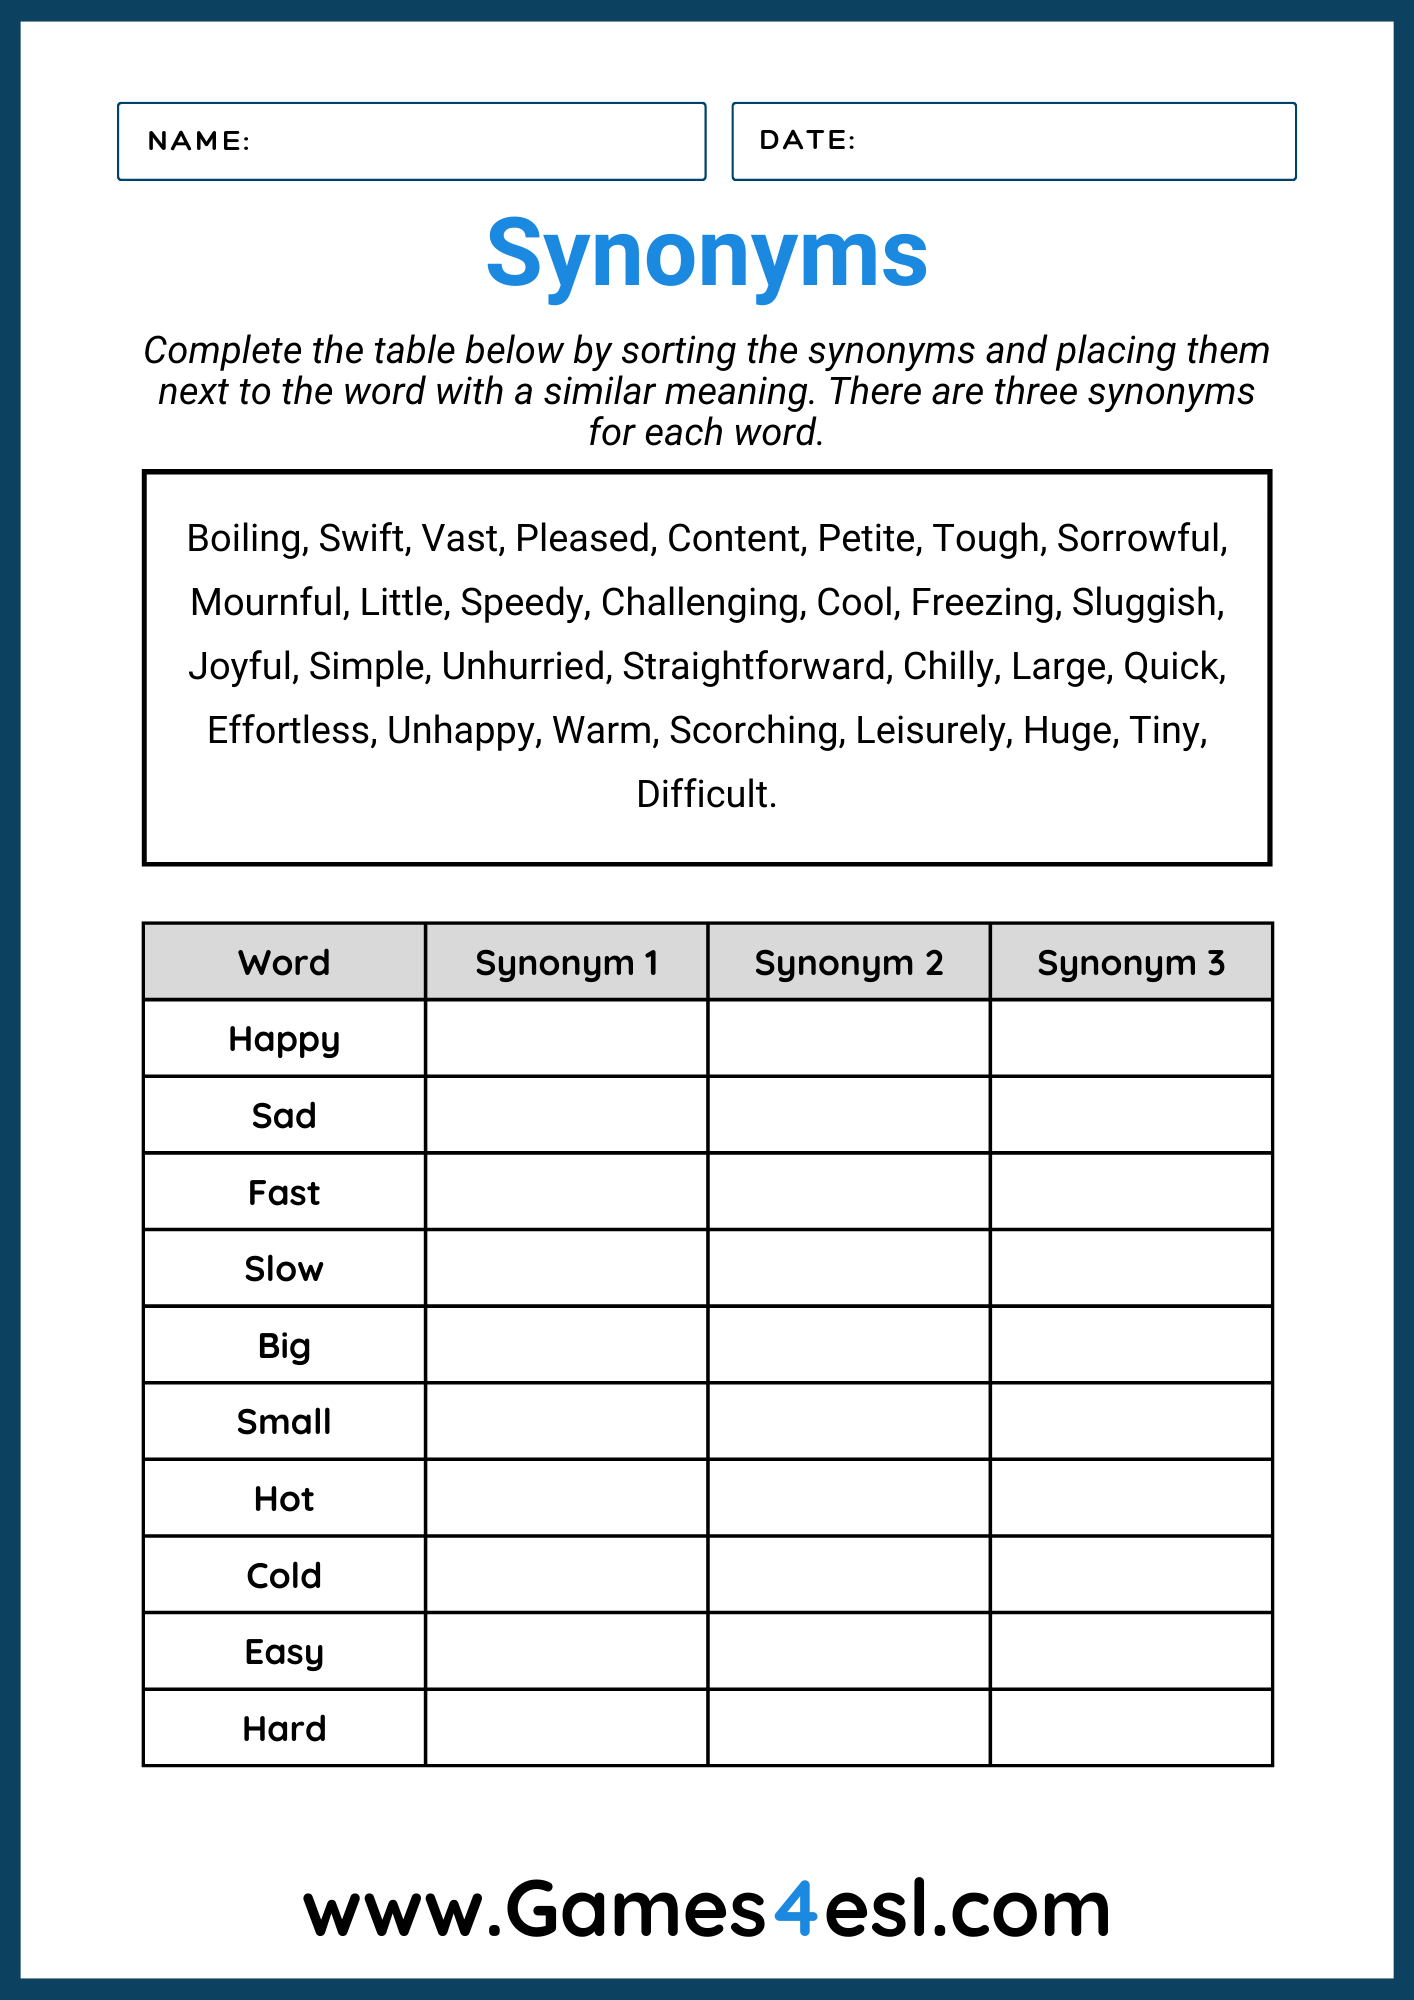 A worksheet for practicing synonyms